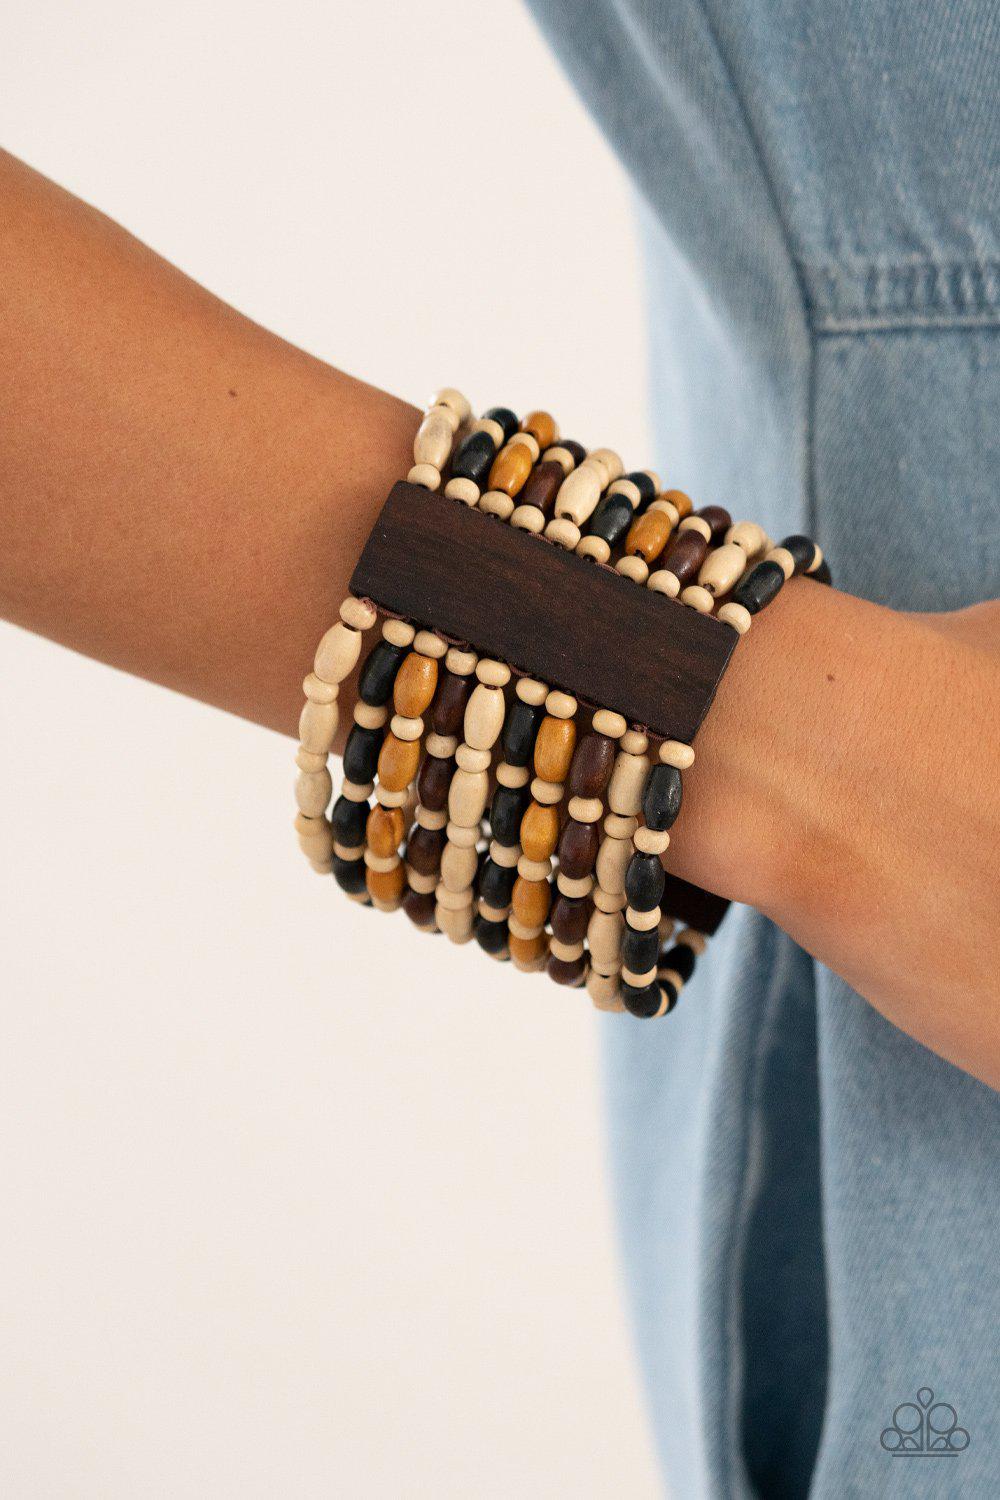 Cayman Carnival Multi Black, Brown and White Wood Bracelet - Paparazzi Accessories- lightbox - CarasShop.com - $5 Jewelry by Cara Jewels